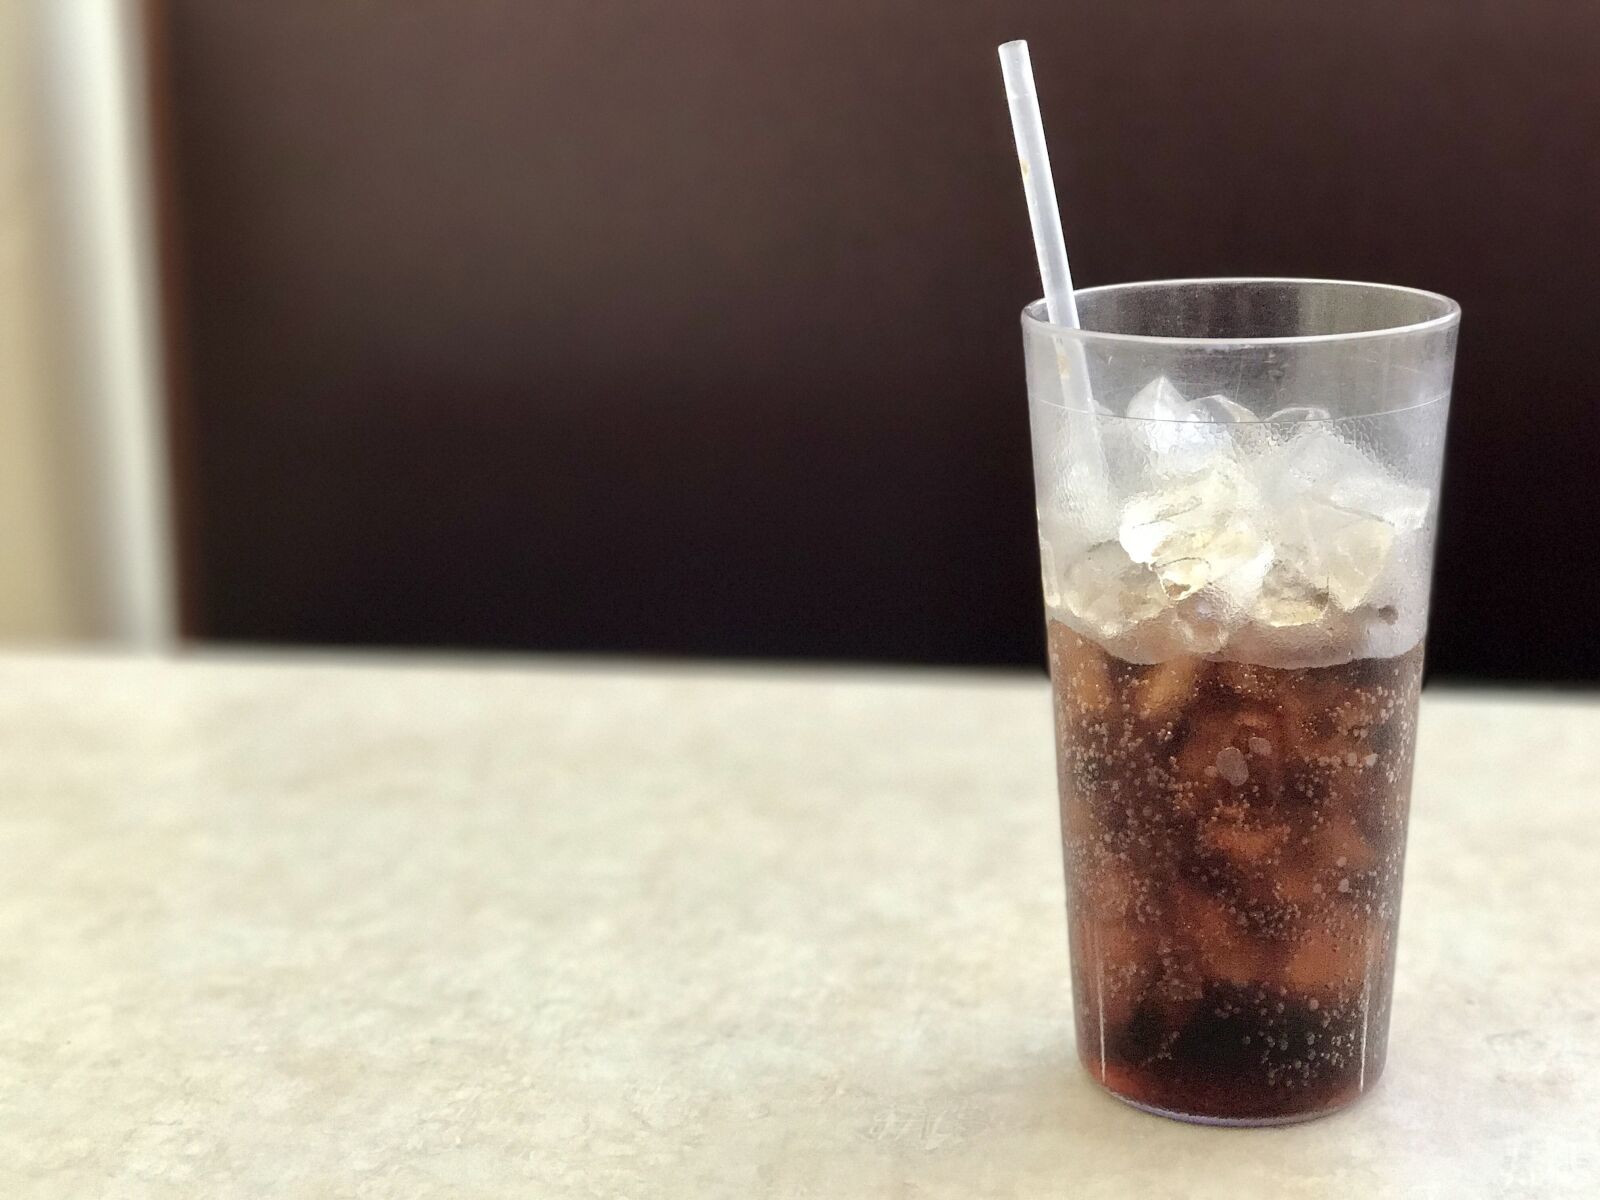 Apple iPhone 7 Plus sample photo. Soda, glass, cold photography